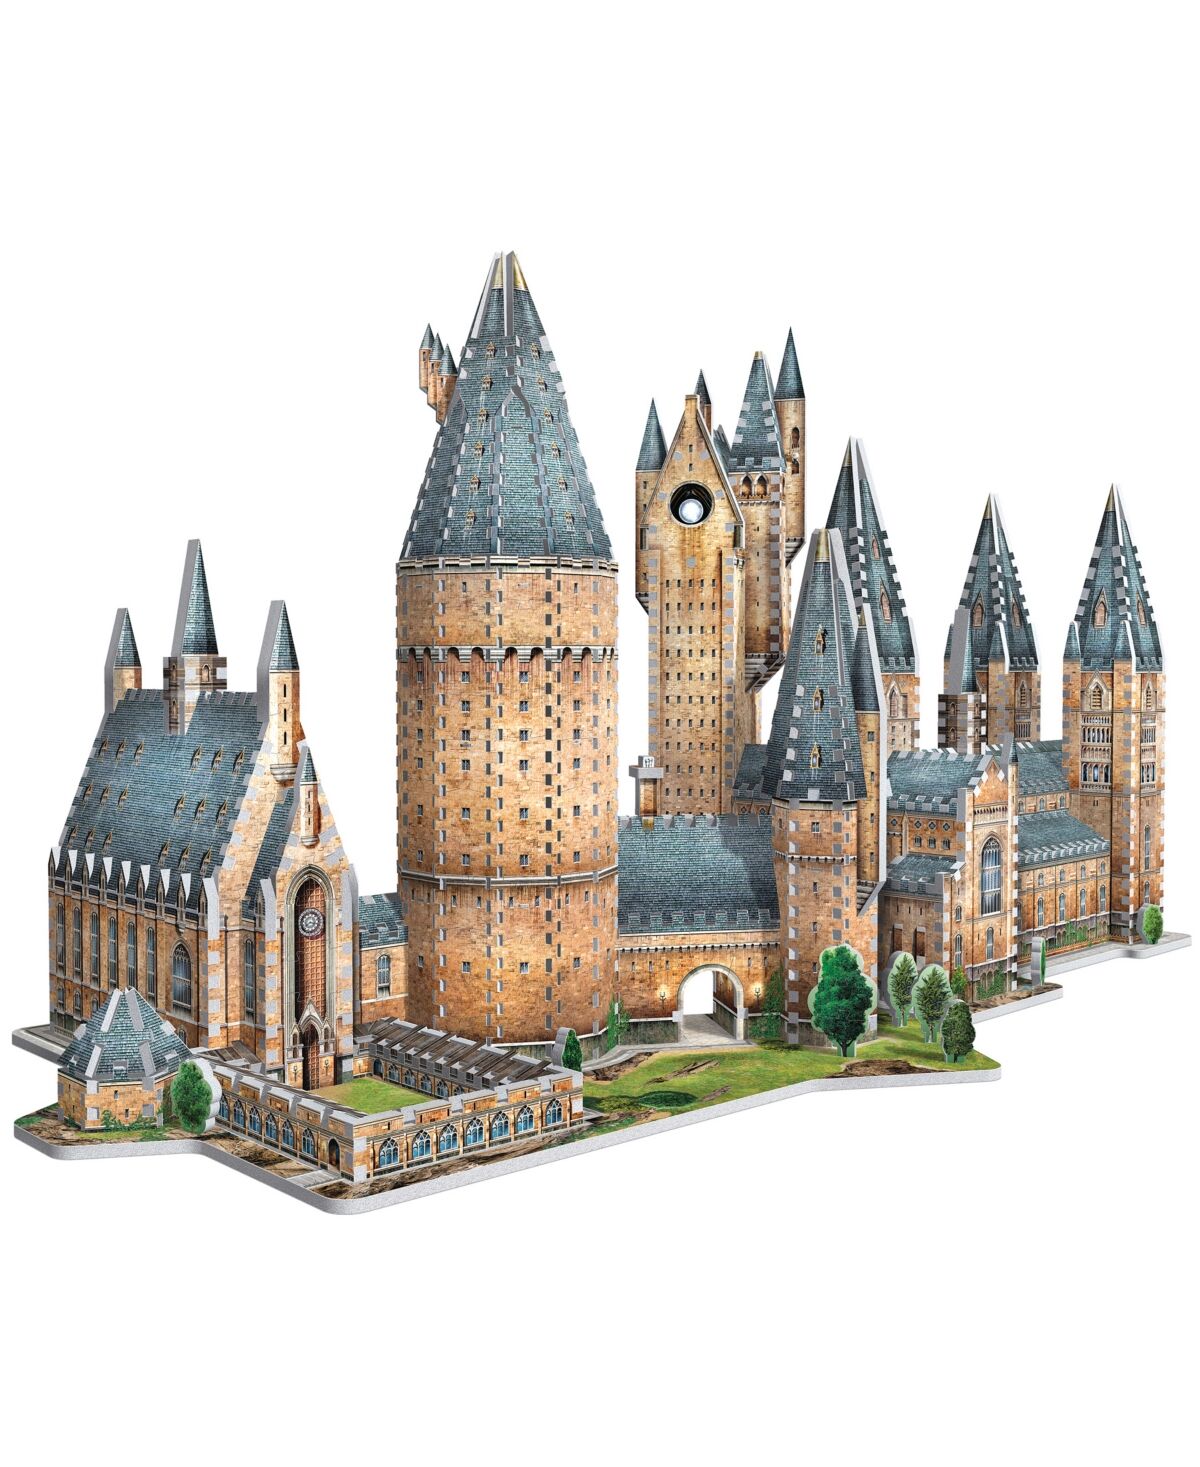 University Games Wrebbit Harry Potter Collection Hogwarts Castle 2 3D Puzzles Great Hall and Astronomy Tower, 1725 Pieces